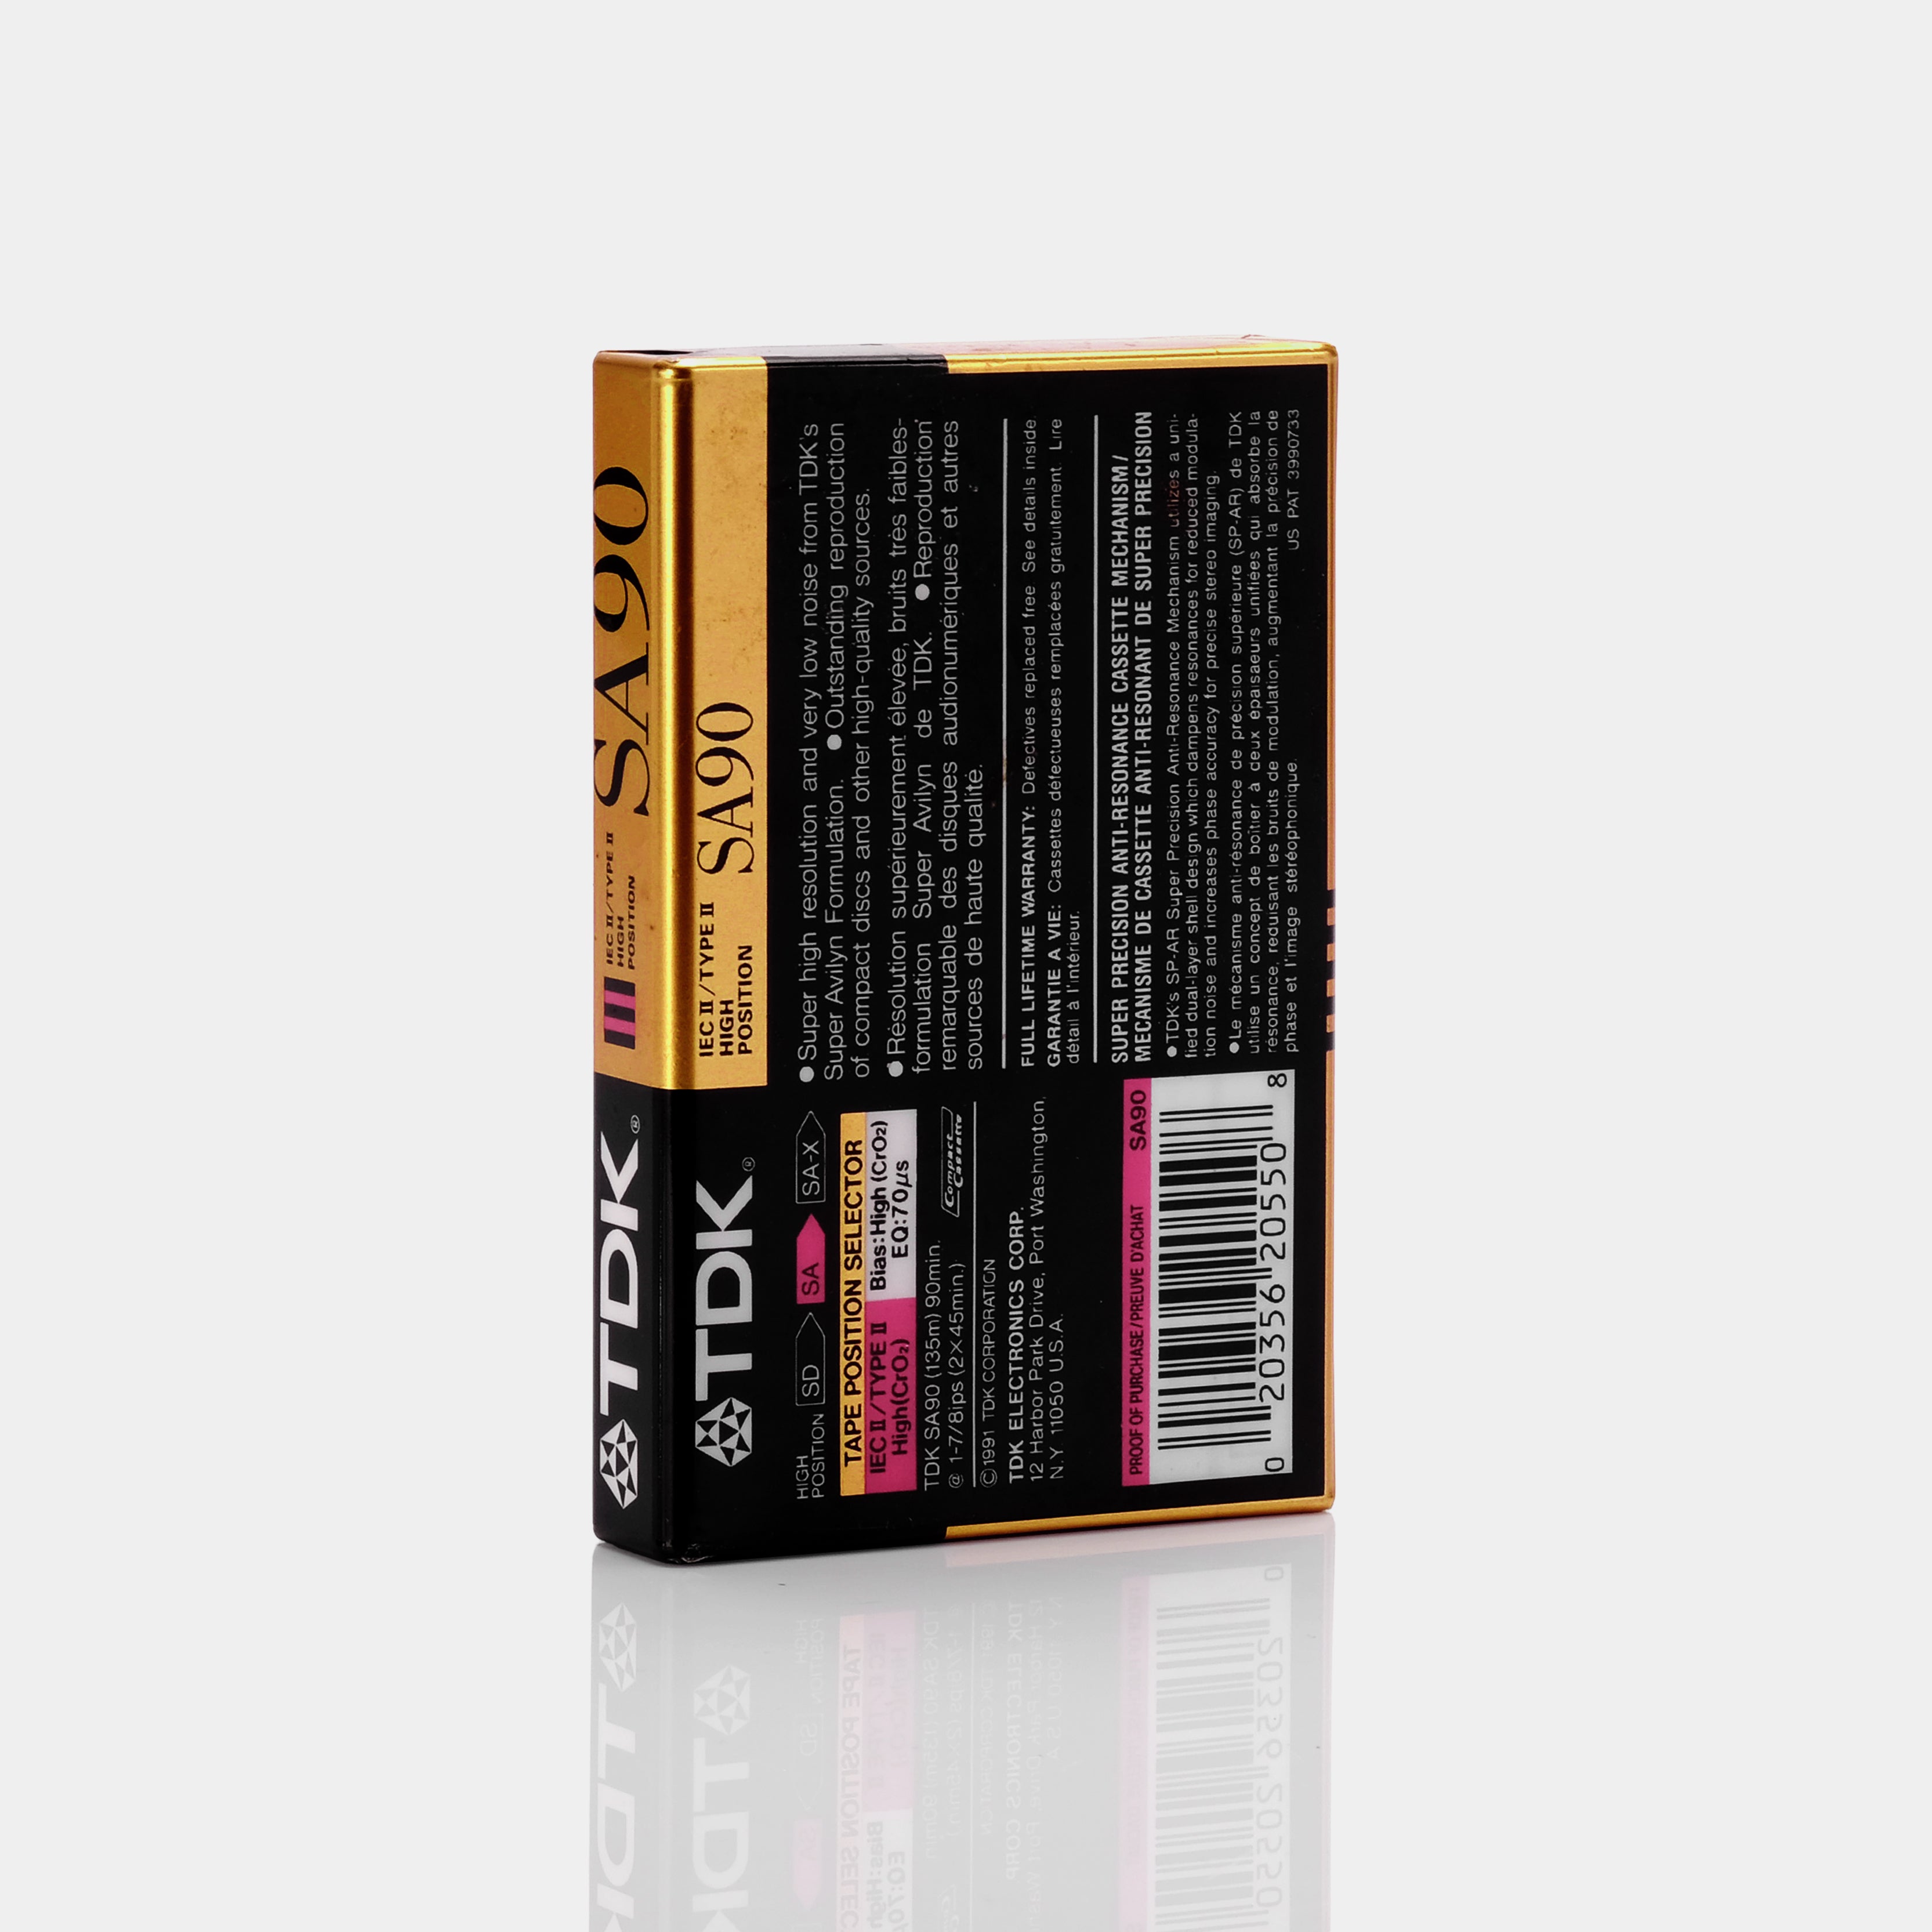 TDK SA90 Type II Blank Recordable Cassette Tape